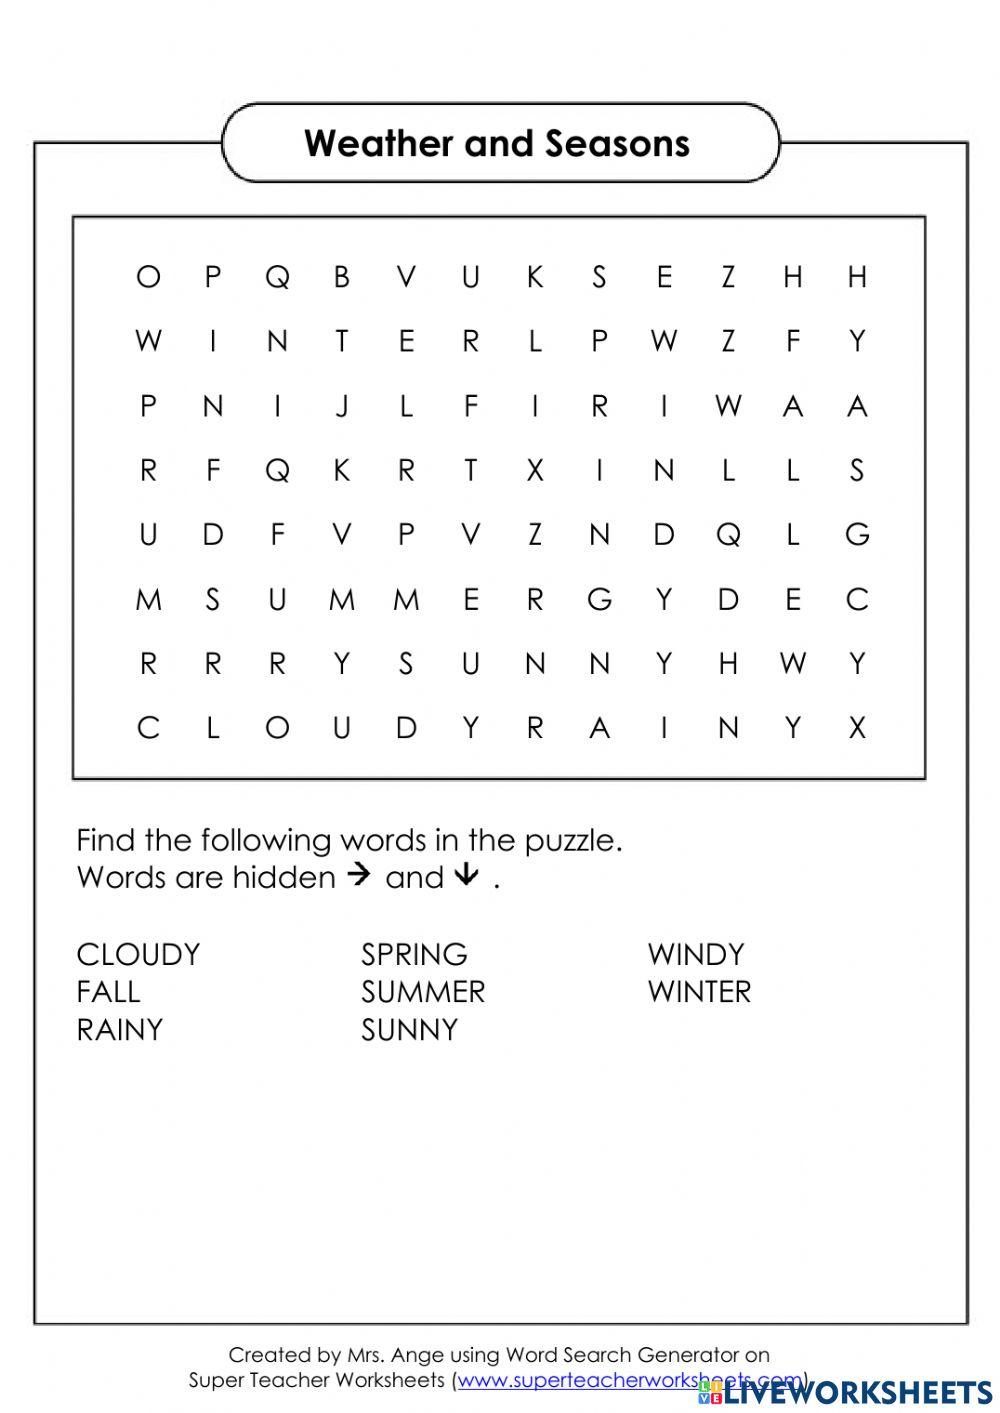 Weather and seasons - word puzzle